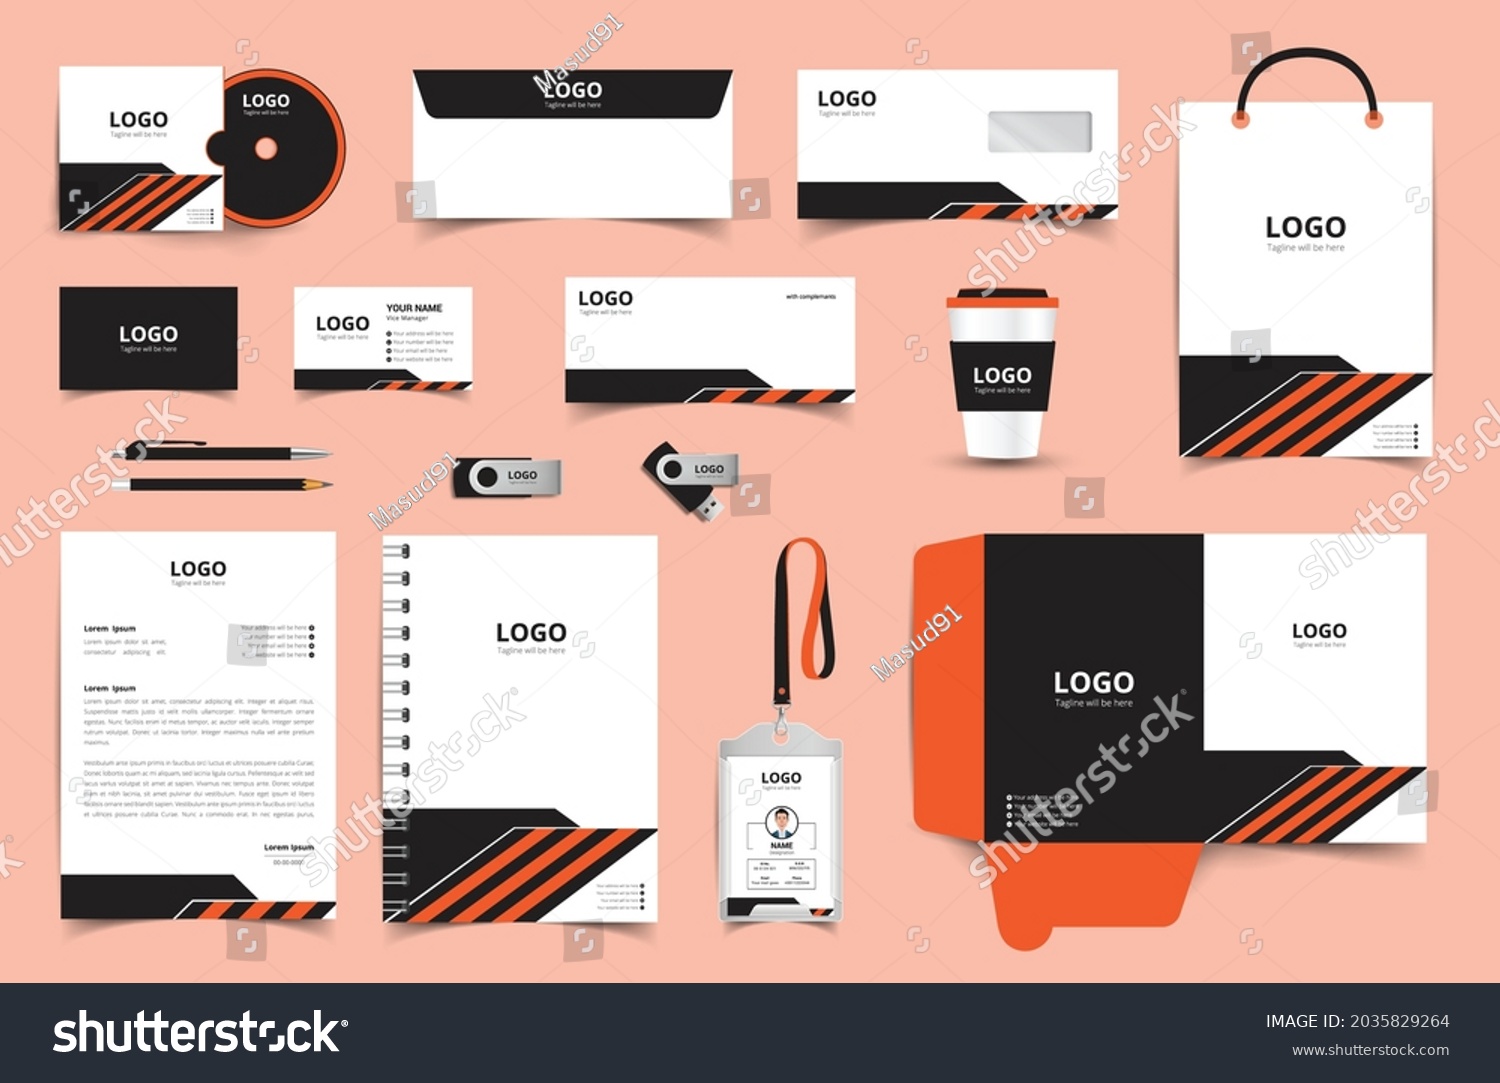 blue-shapes-corporate-stationery-template-design-set-830189-vector-art